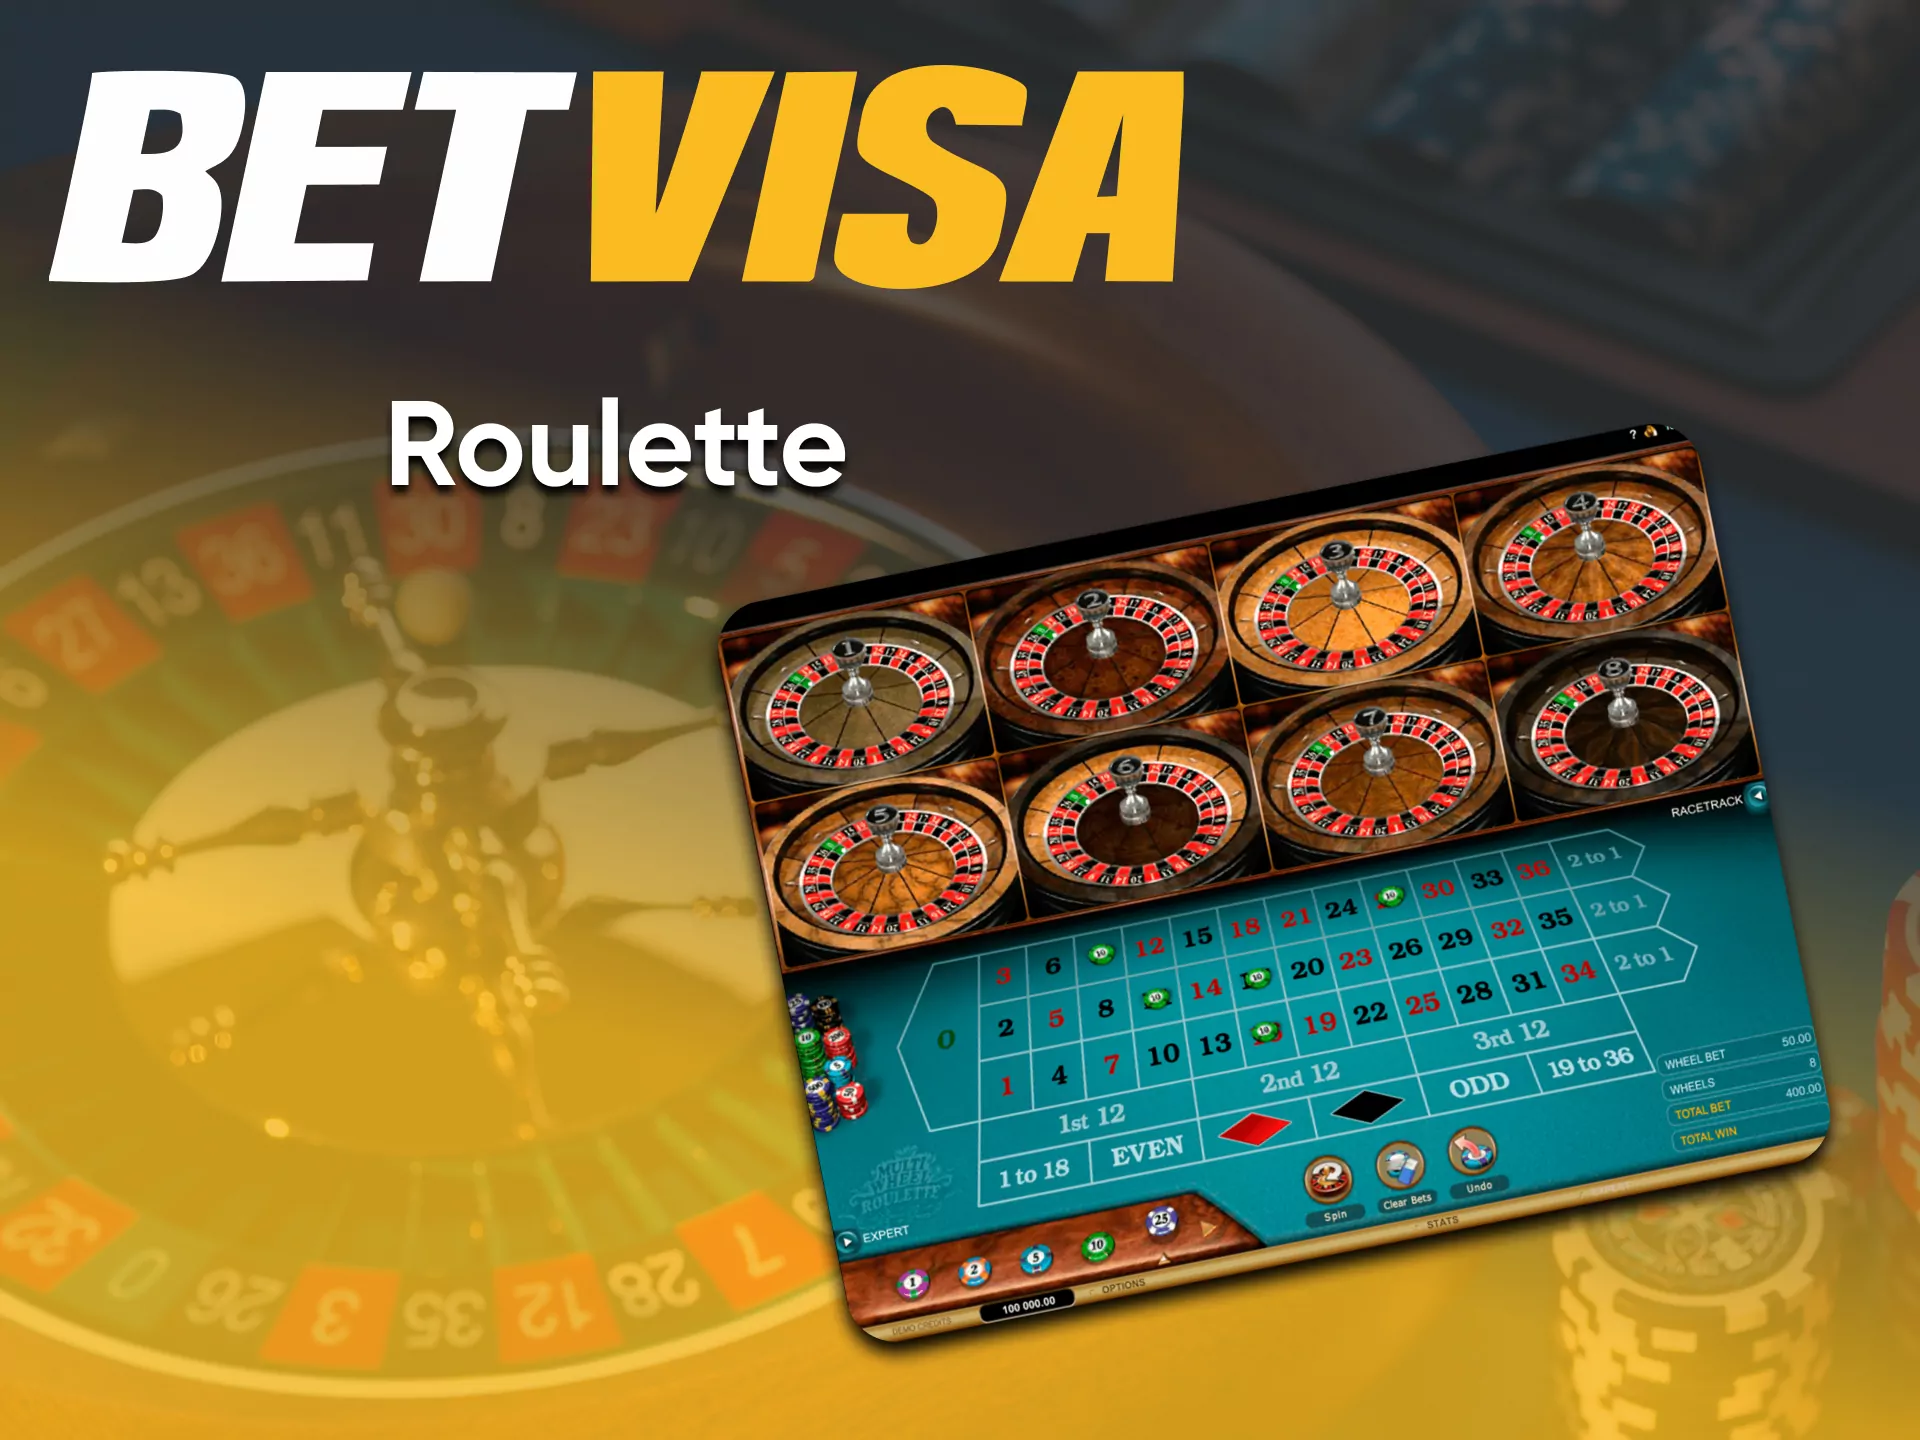 Go to the right section to play Roulette on BetVisa.